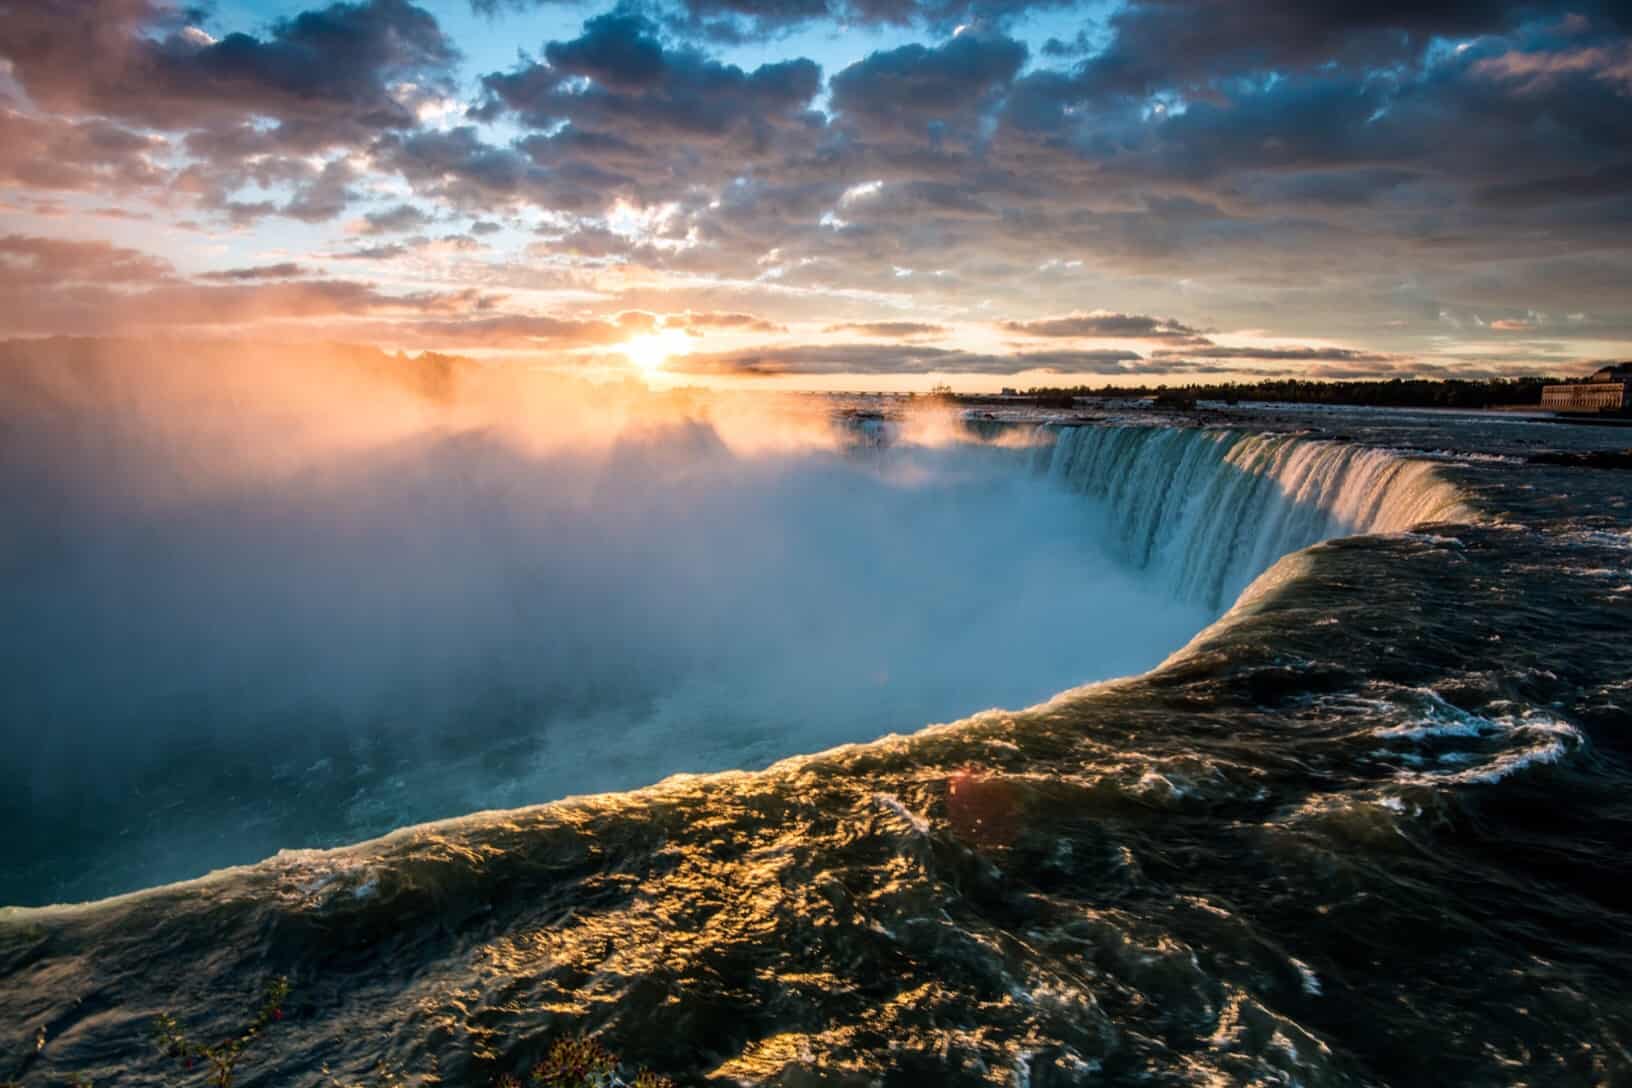 The most powerful part of Niagara Falls is in Canada.